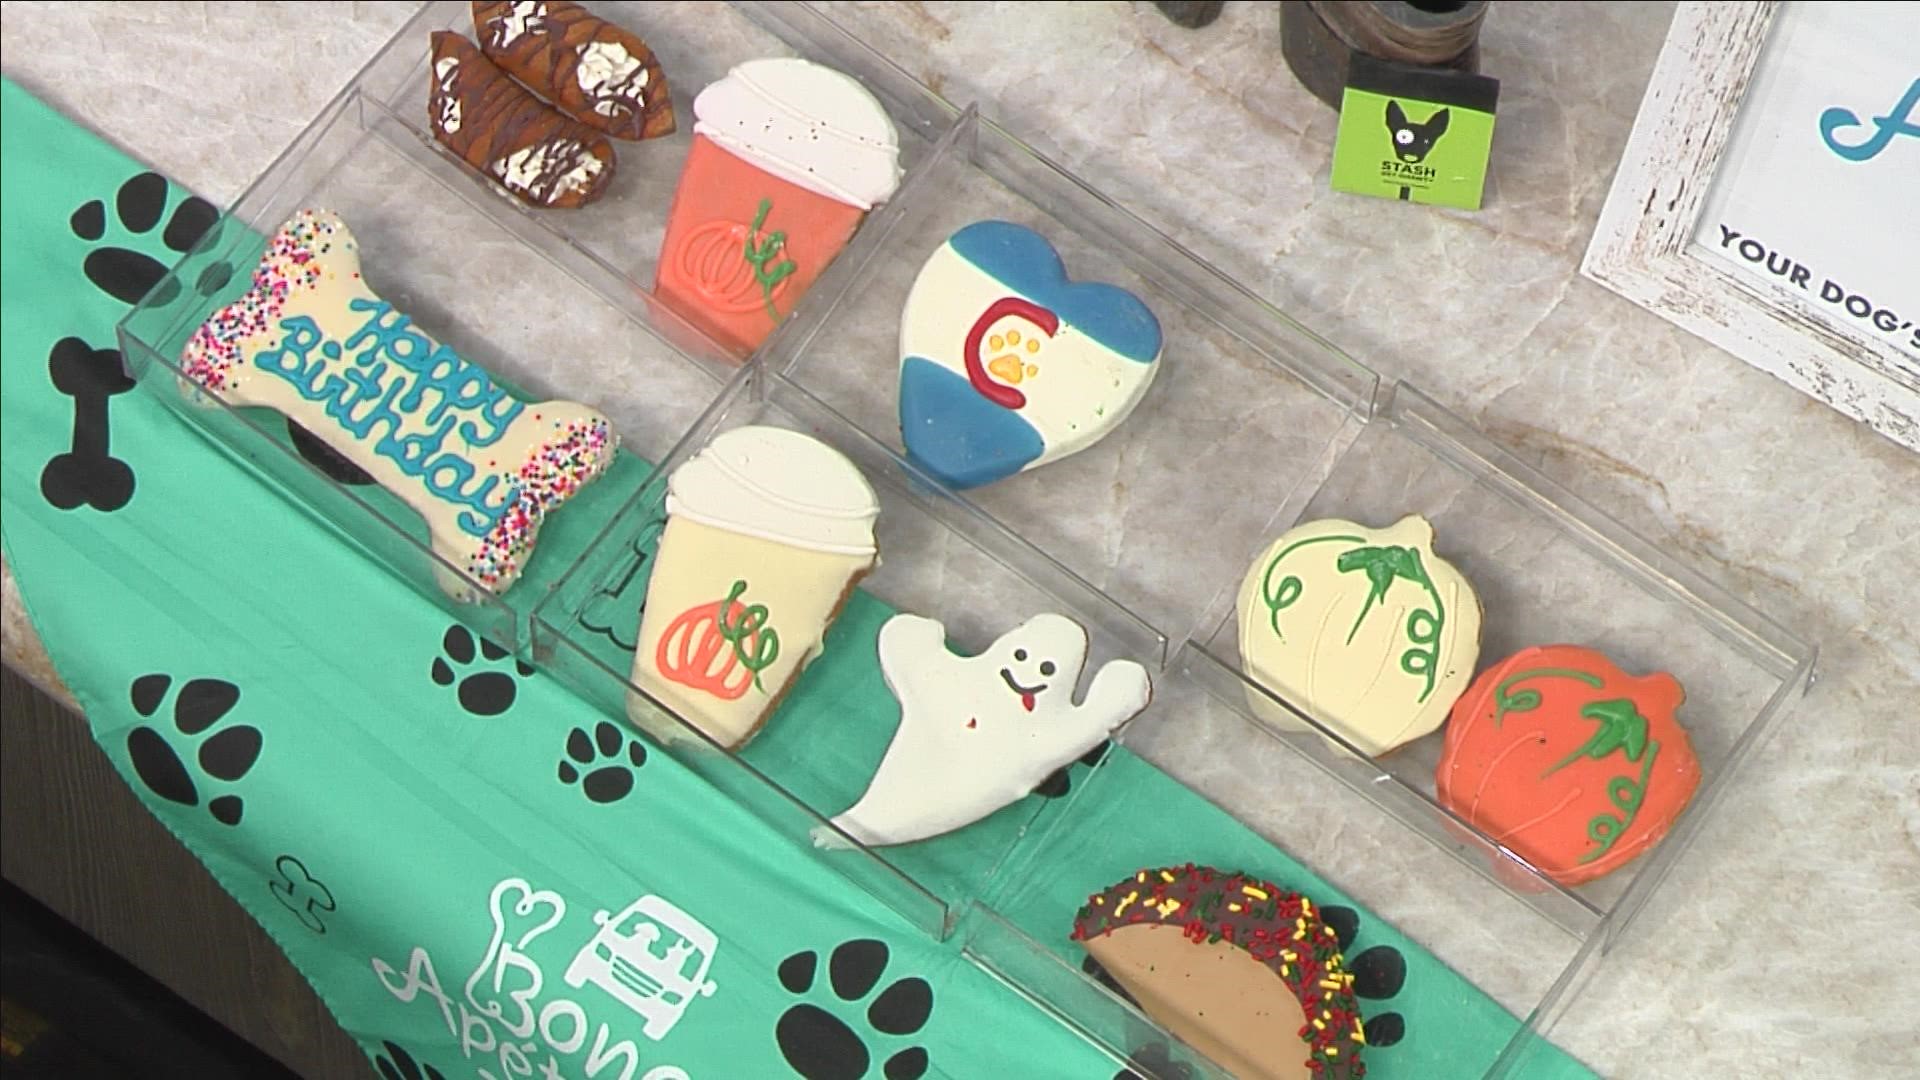 Bone Apétreat! owner Tiffany Brown stops by 9NEWS to talk about her dog food truck business and share some of their Halloween offerings.